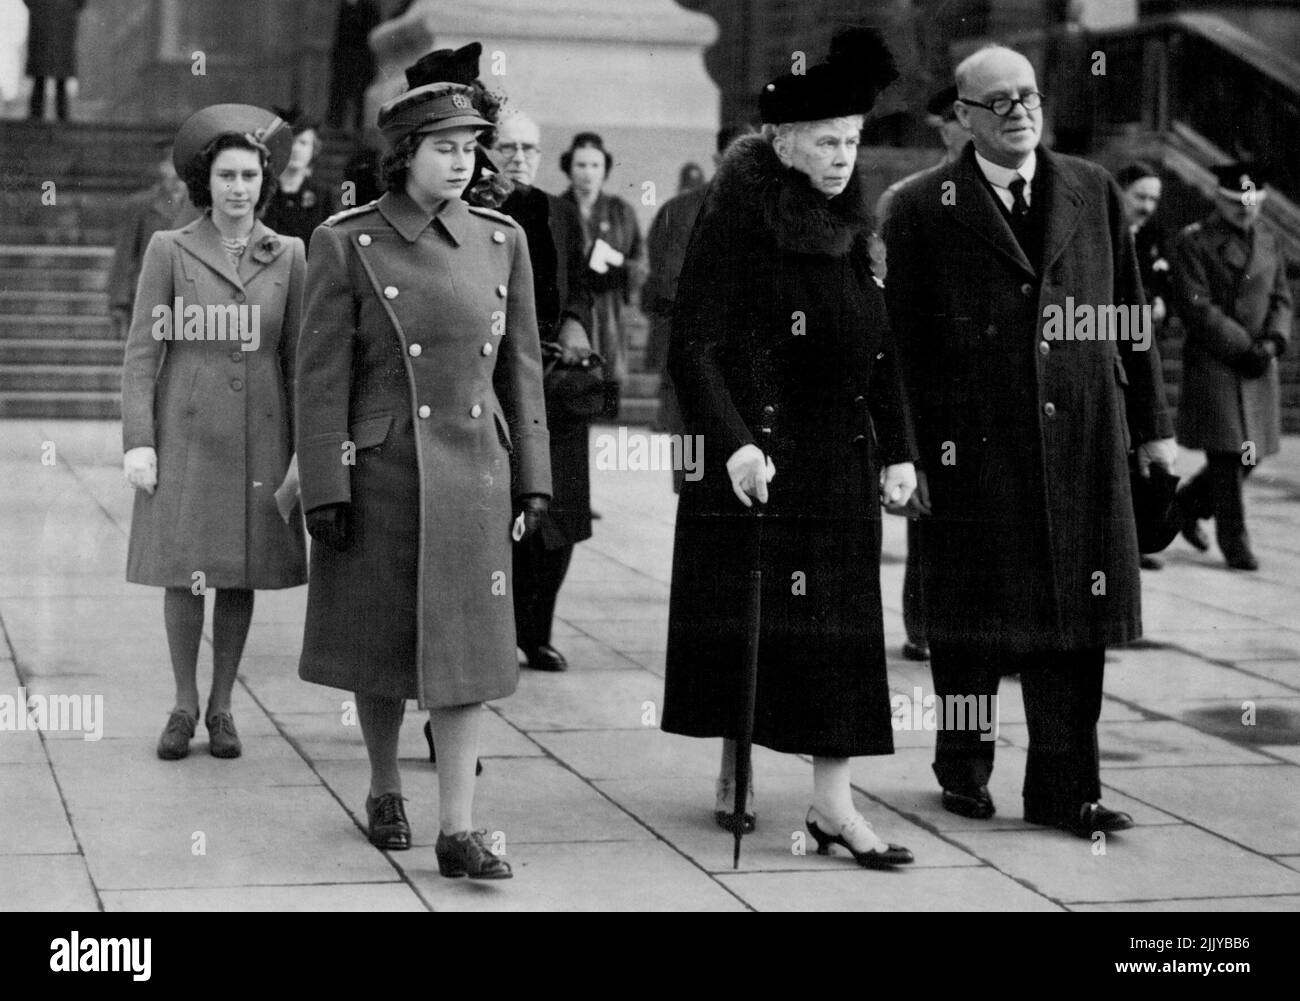 Armistice Day - 1945 - Queen Mary with Princess Elizabeth and Princess Margaret Rose arriving for the ceremony. March 25, 1953. (Photo by London News Agency). Stock Photo